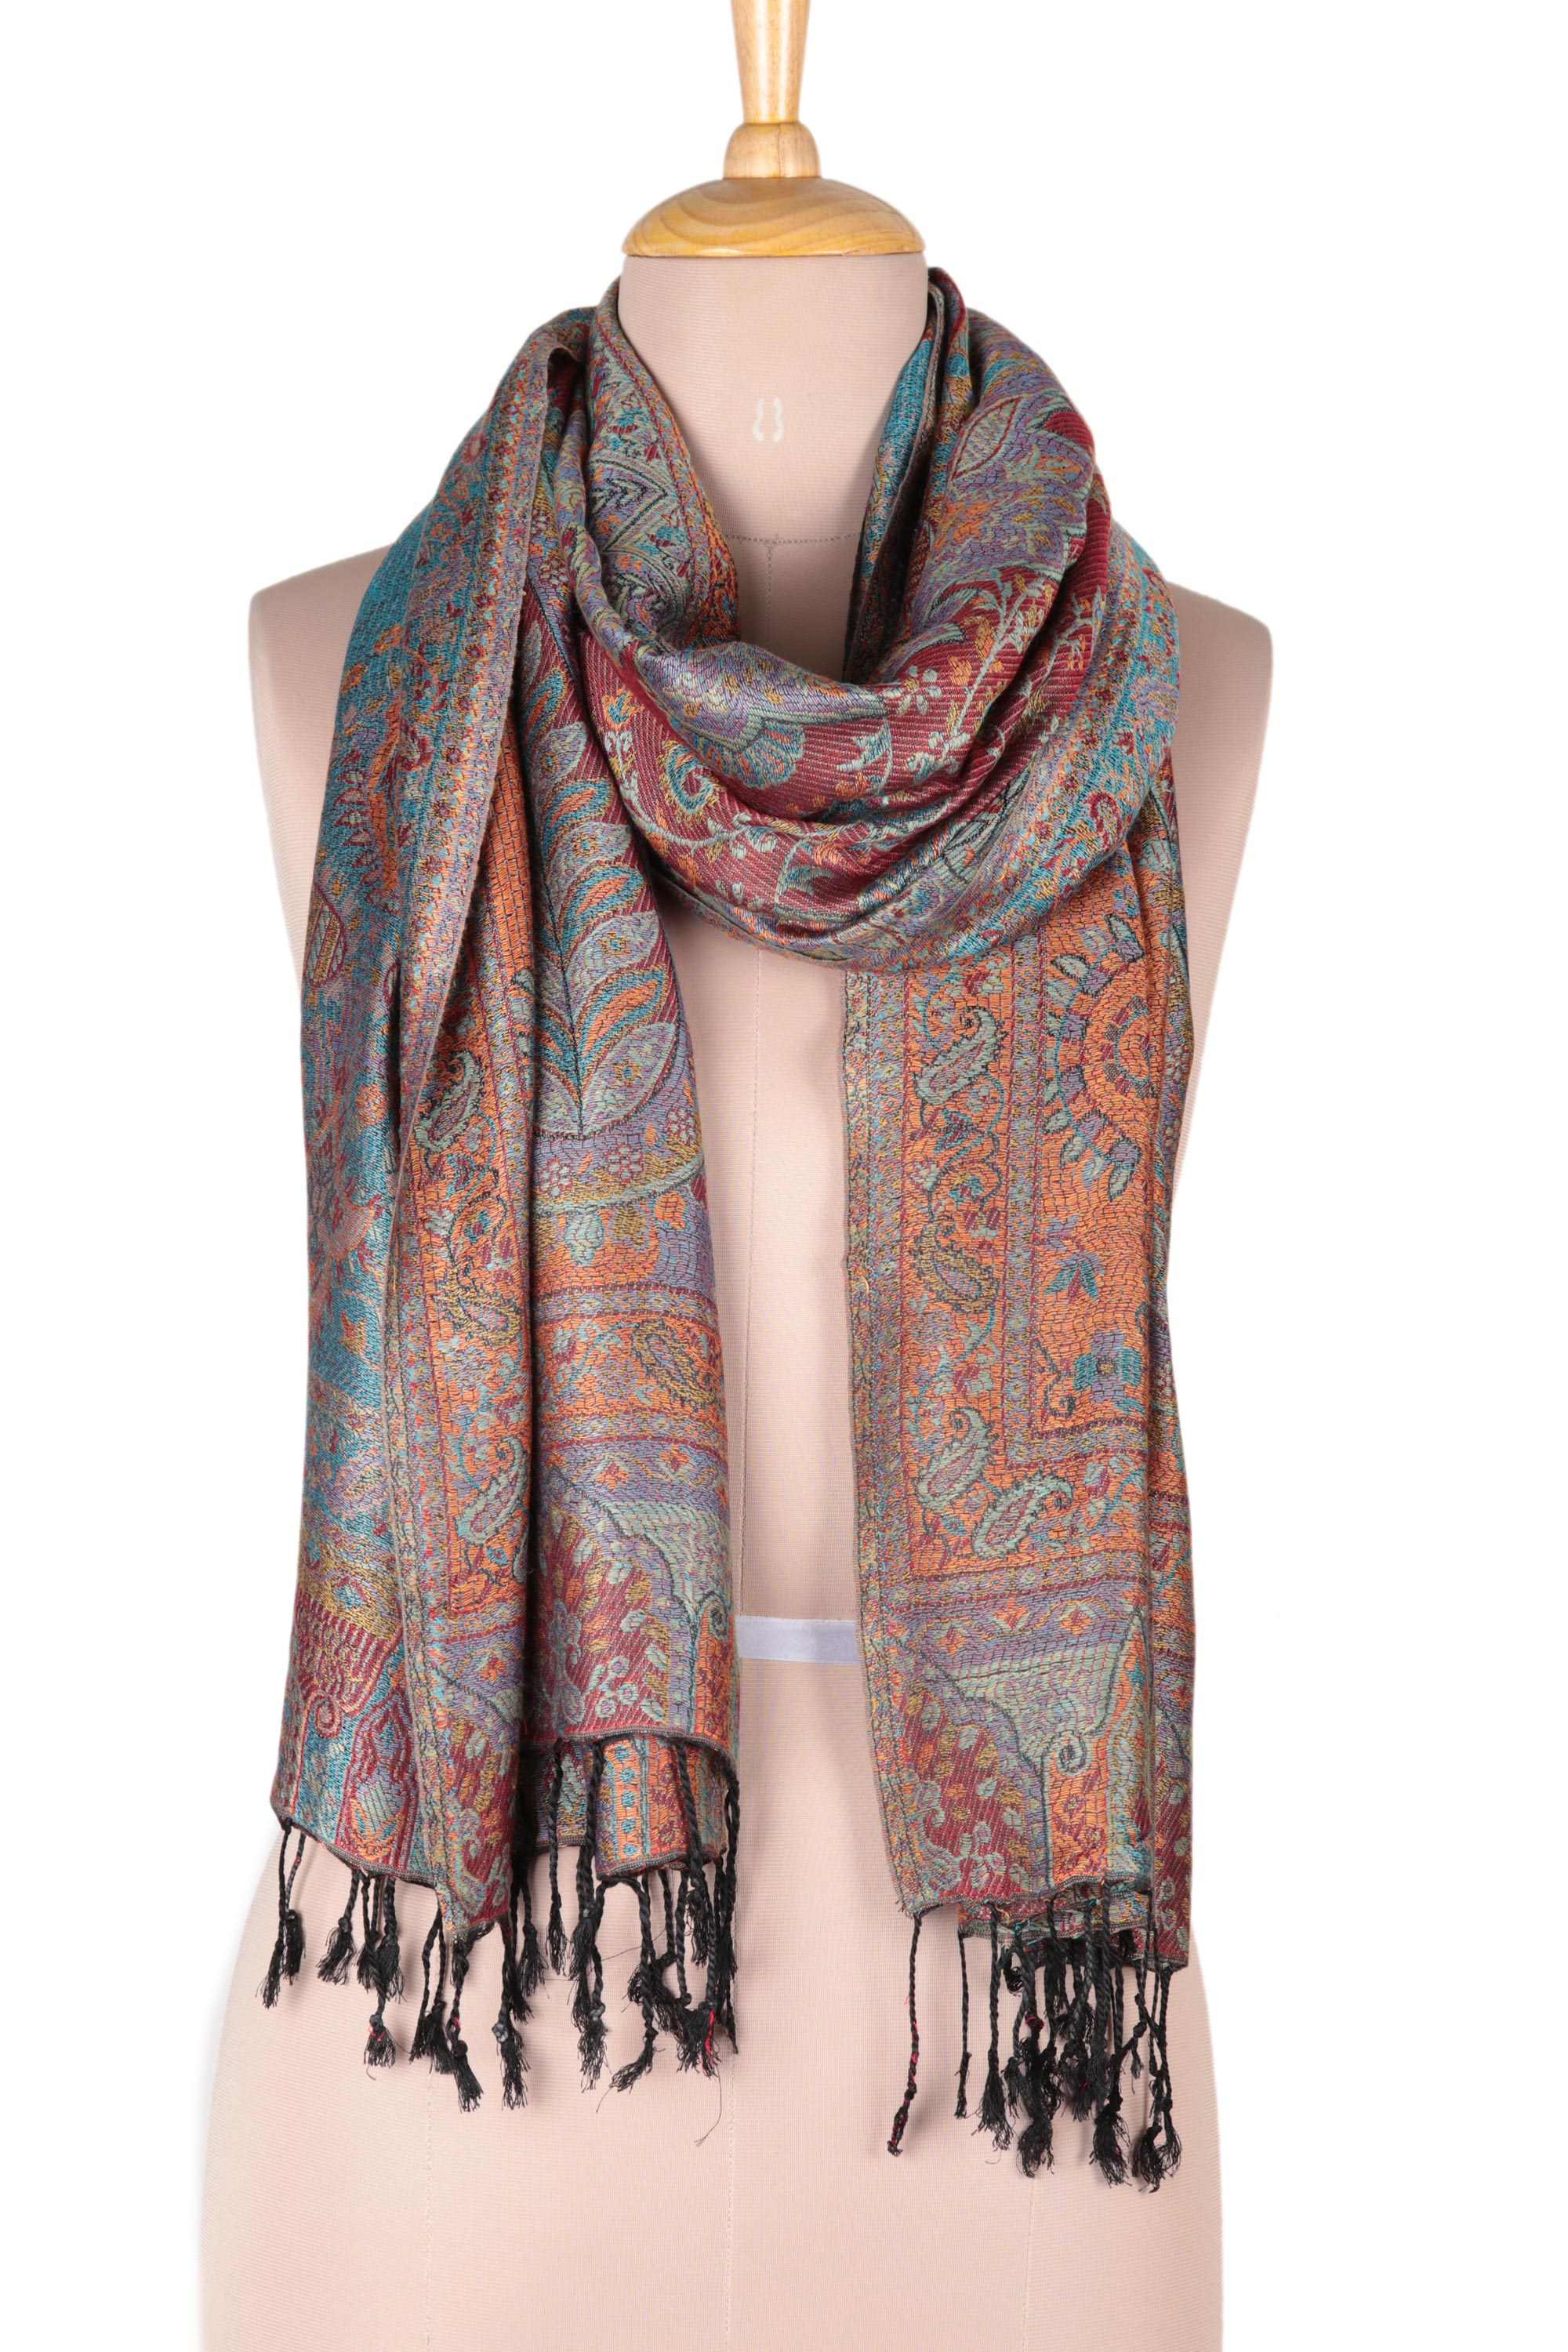 Reversible Modal Jacquard Shawl in Muted Jewel Tones - Paisley Delight ...